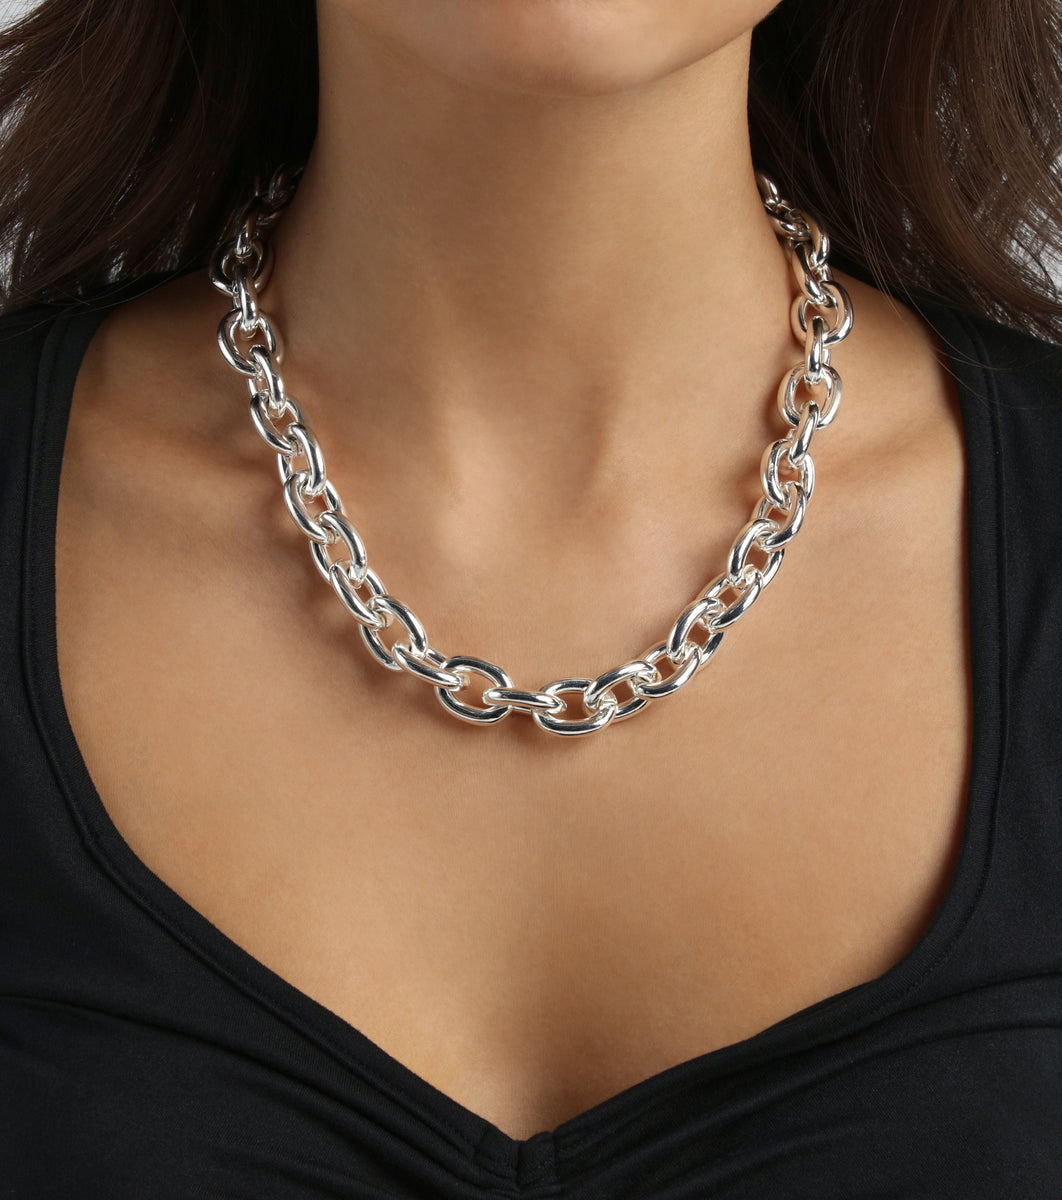 Make It Chic Chunky Chain Necklace